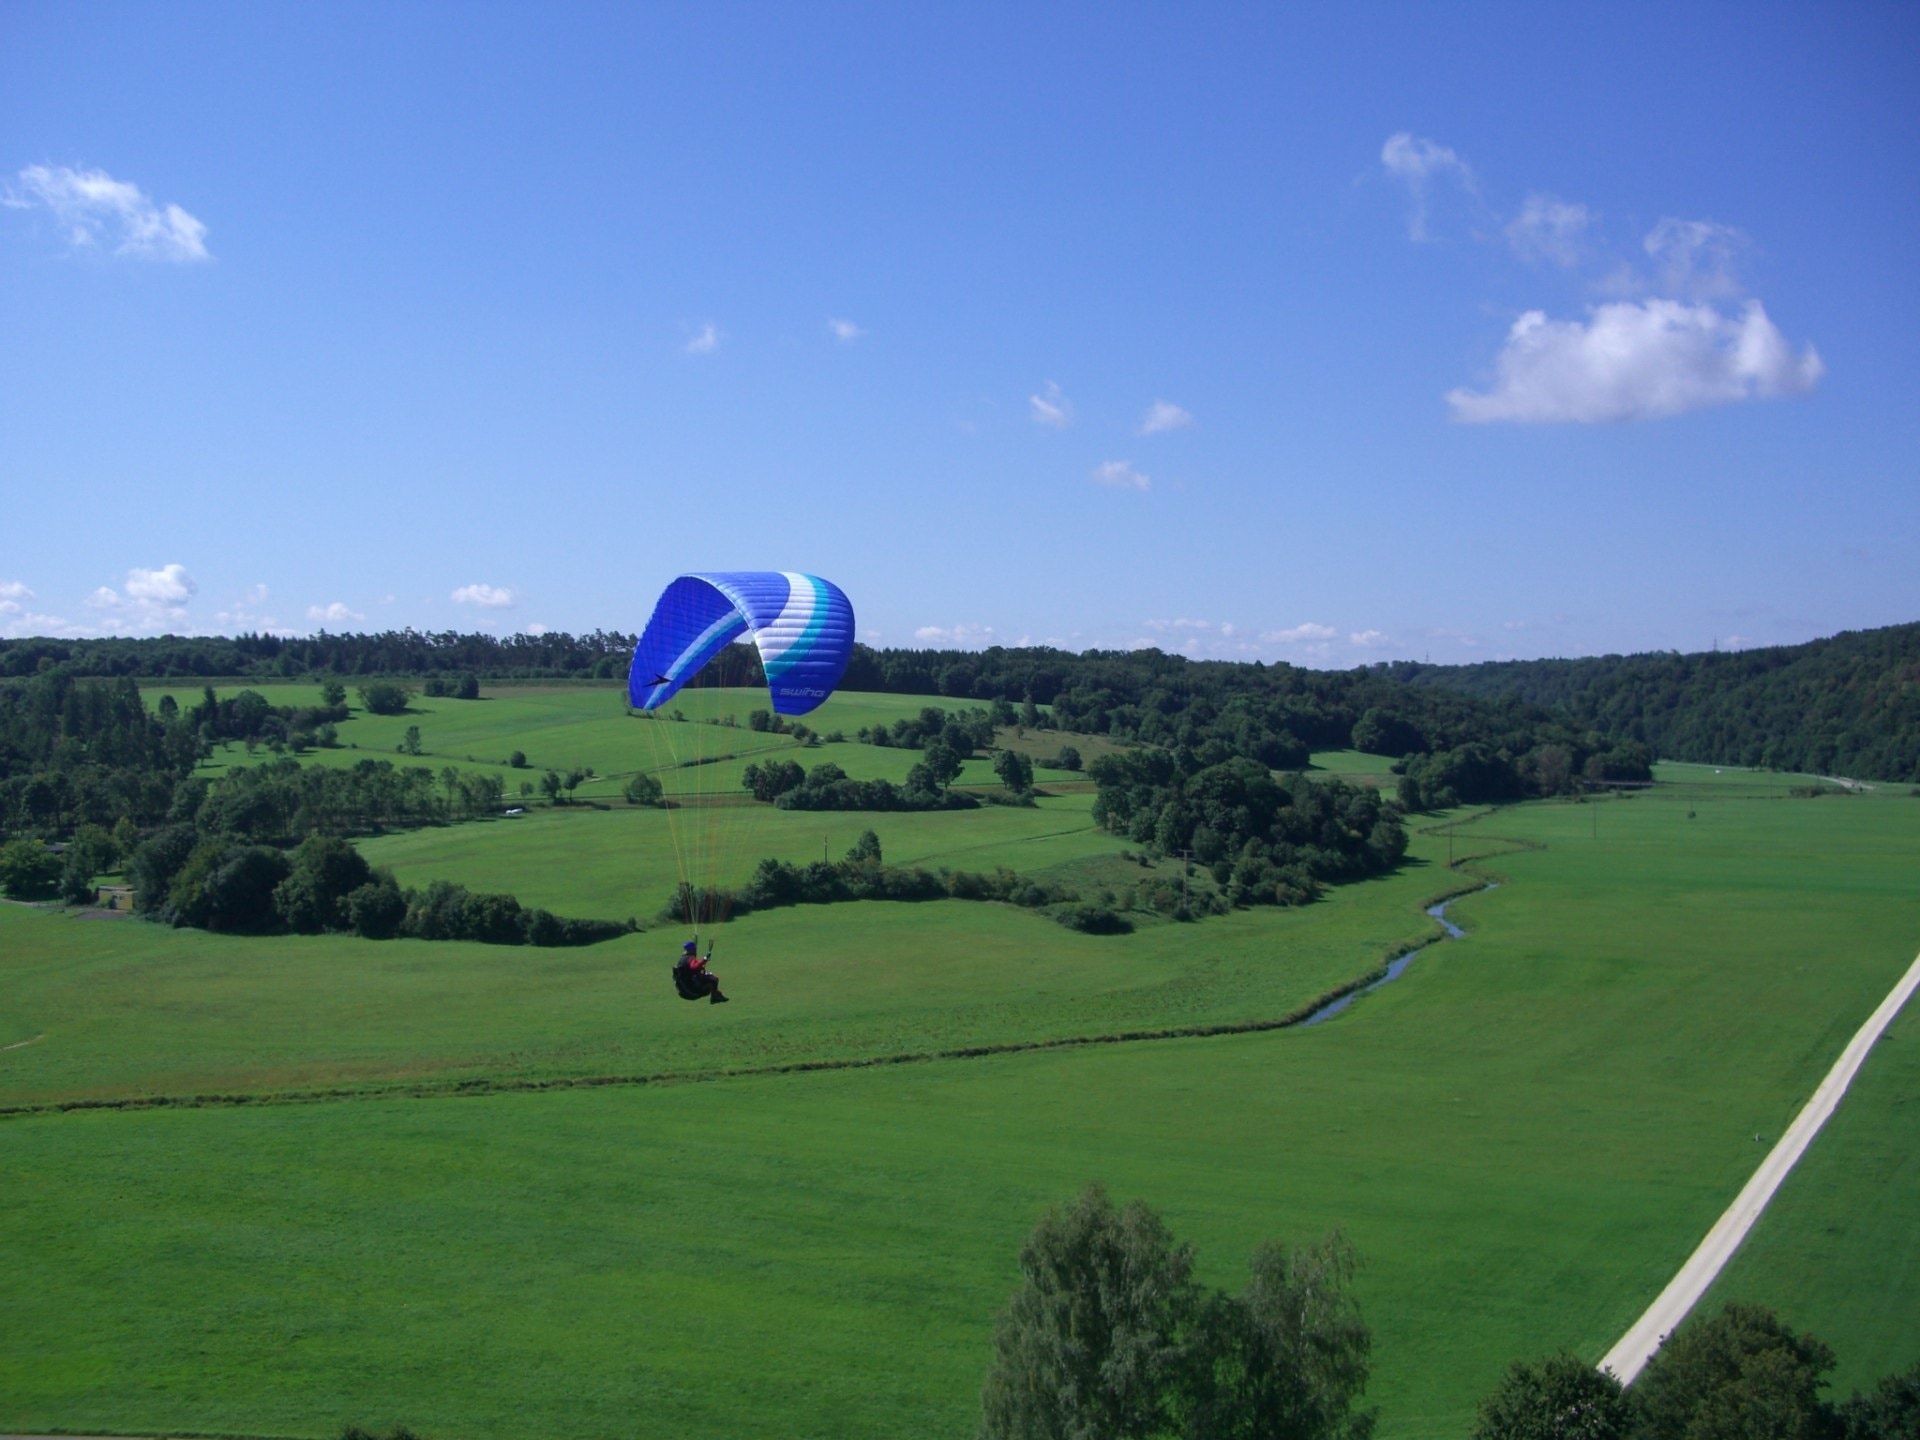 man in white and blue parachute